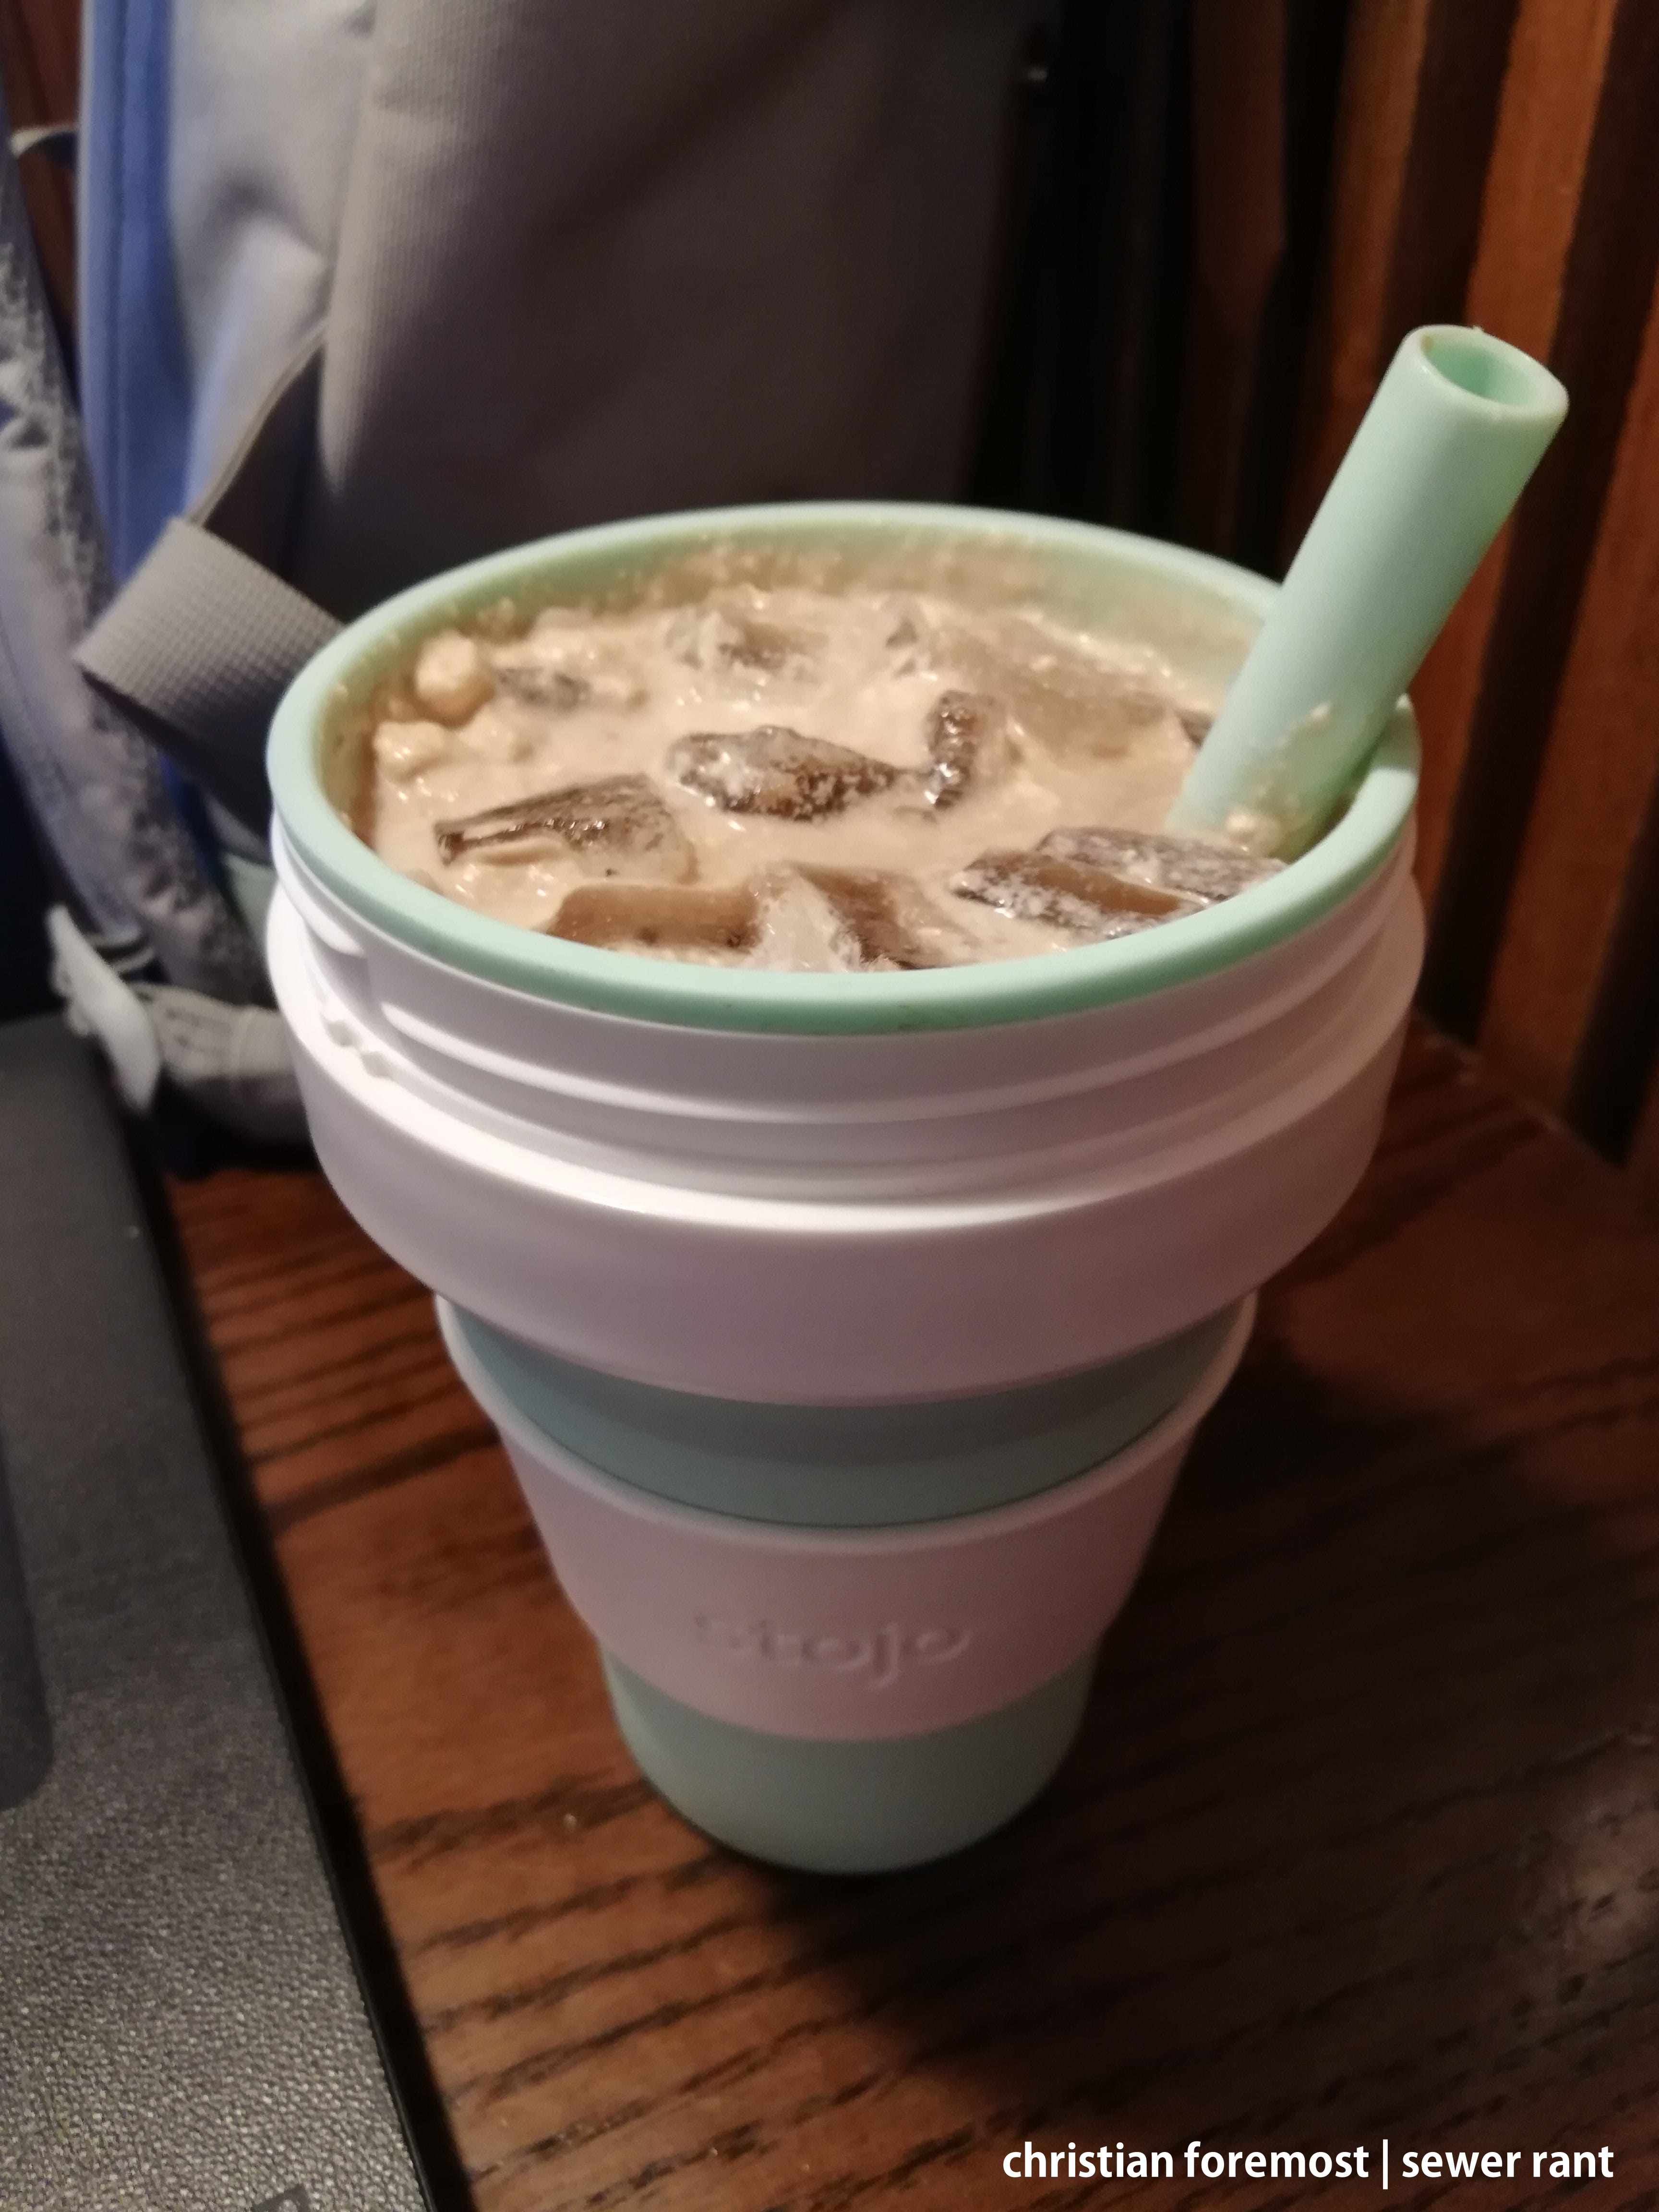 Two-two - Classic Iced Chocolate, Replace Vanilla Syrup with White Chocolate Mocha